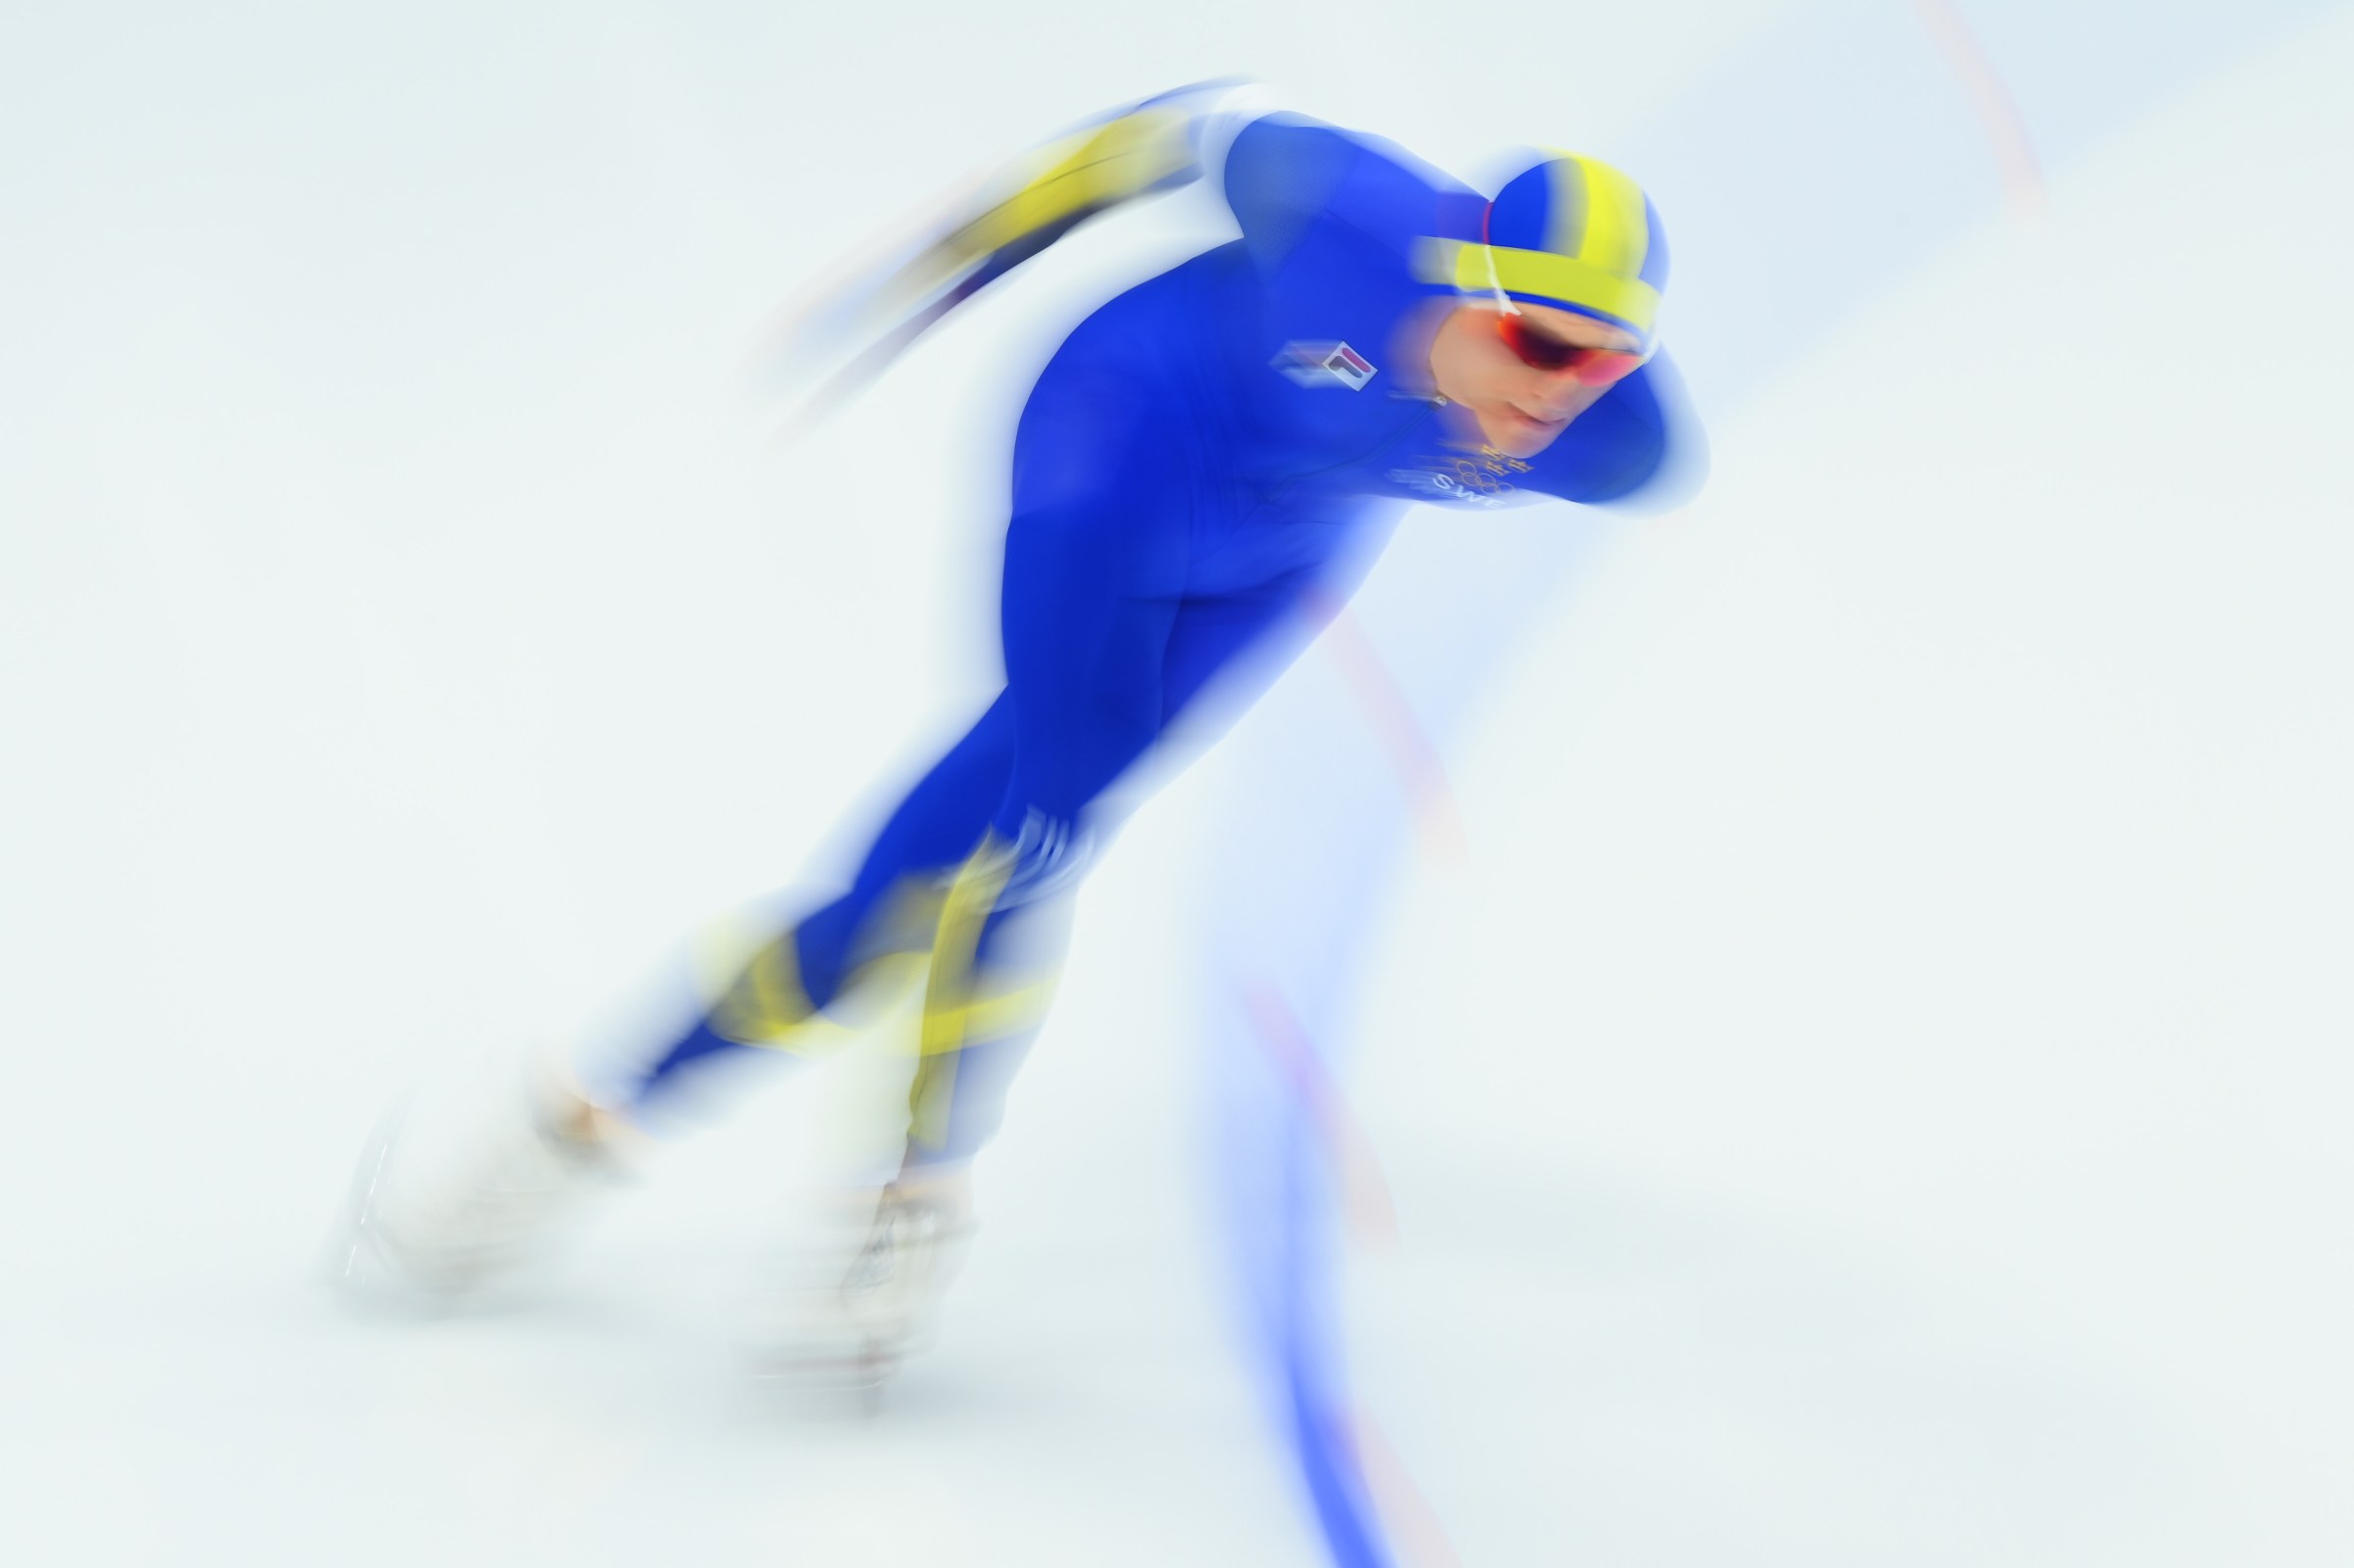 Nils van der Poel of Team Sweden skates on the way to winning the Gold medal and setting a new Olympic record time of 6:08.84 during the Men's 5000m on day two of the Beijing 2022 Winter Olympic Games at National Speed Skating Oval on February 06, 2022 in Beijing, China.